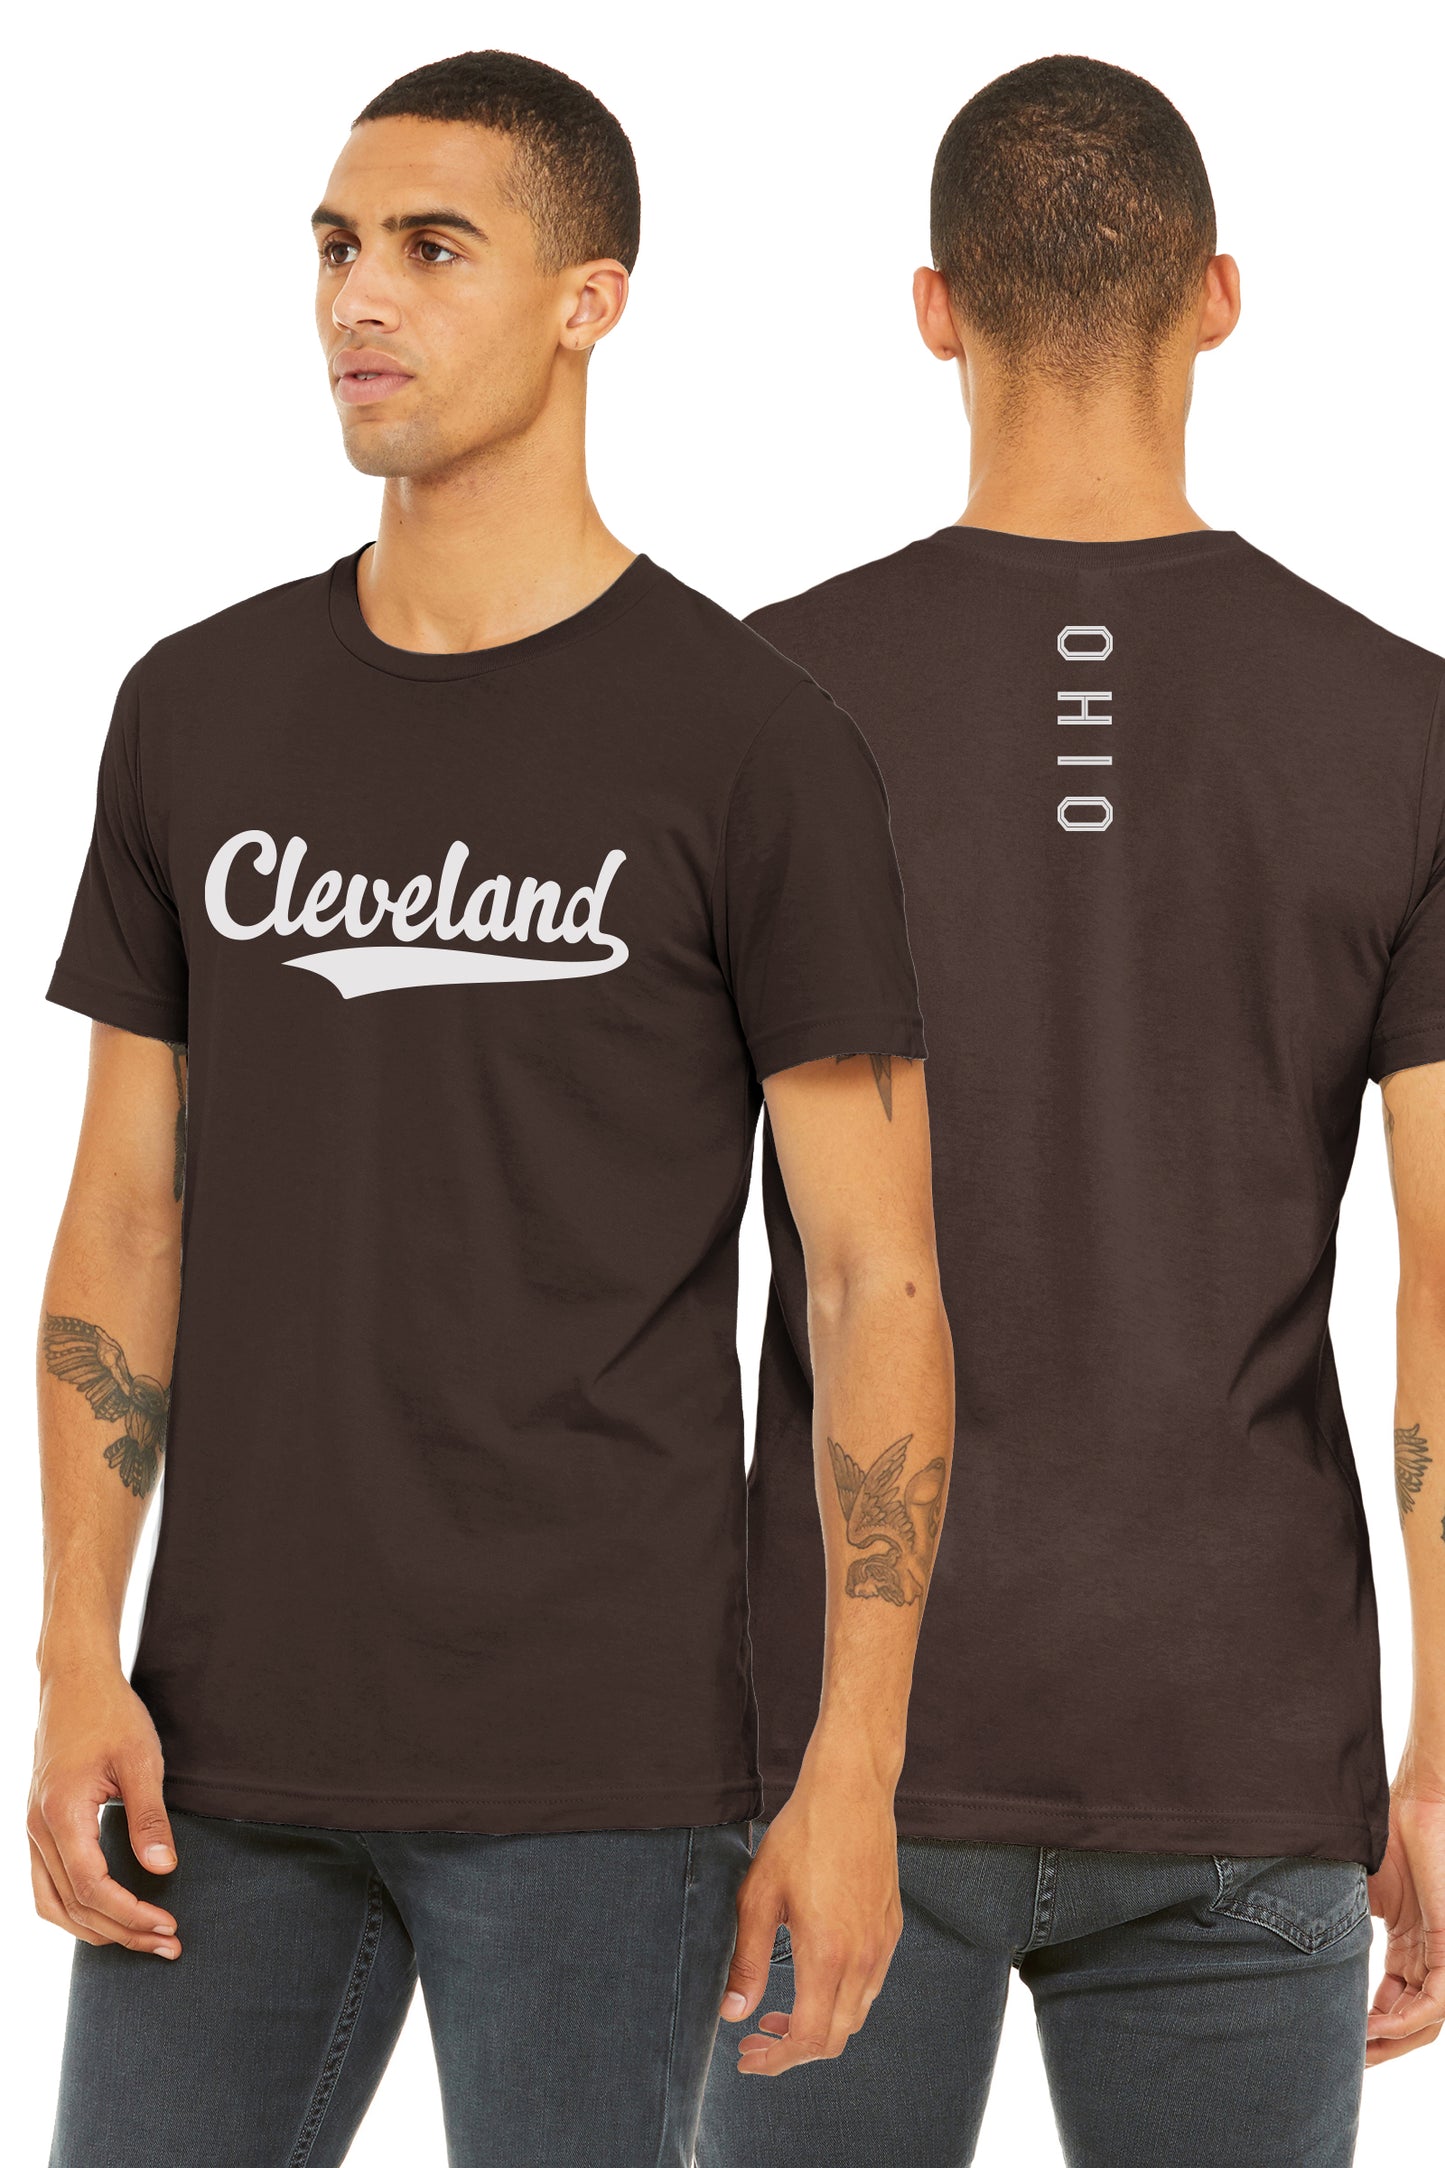 Daxton Adult Unisex Tshirt Cleveland Script with Ohio Vertical on the Back